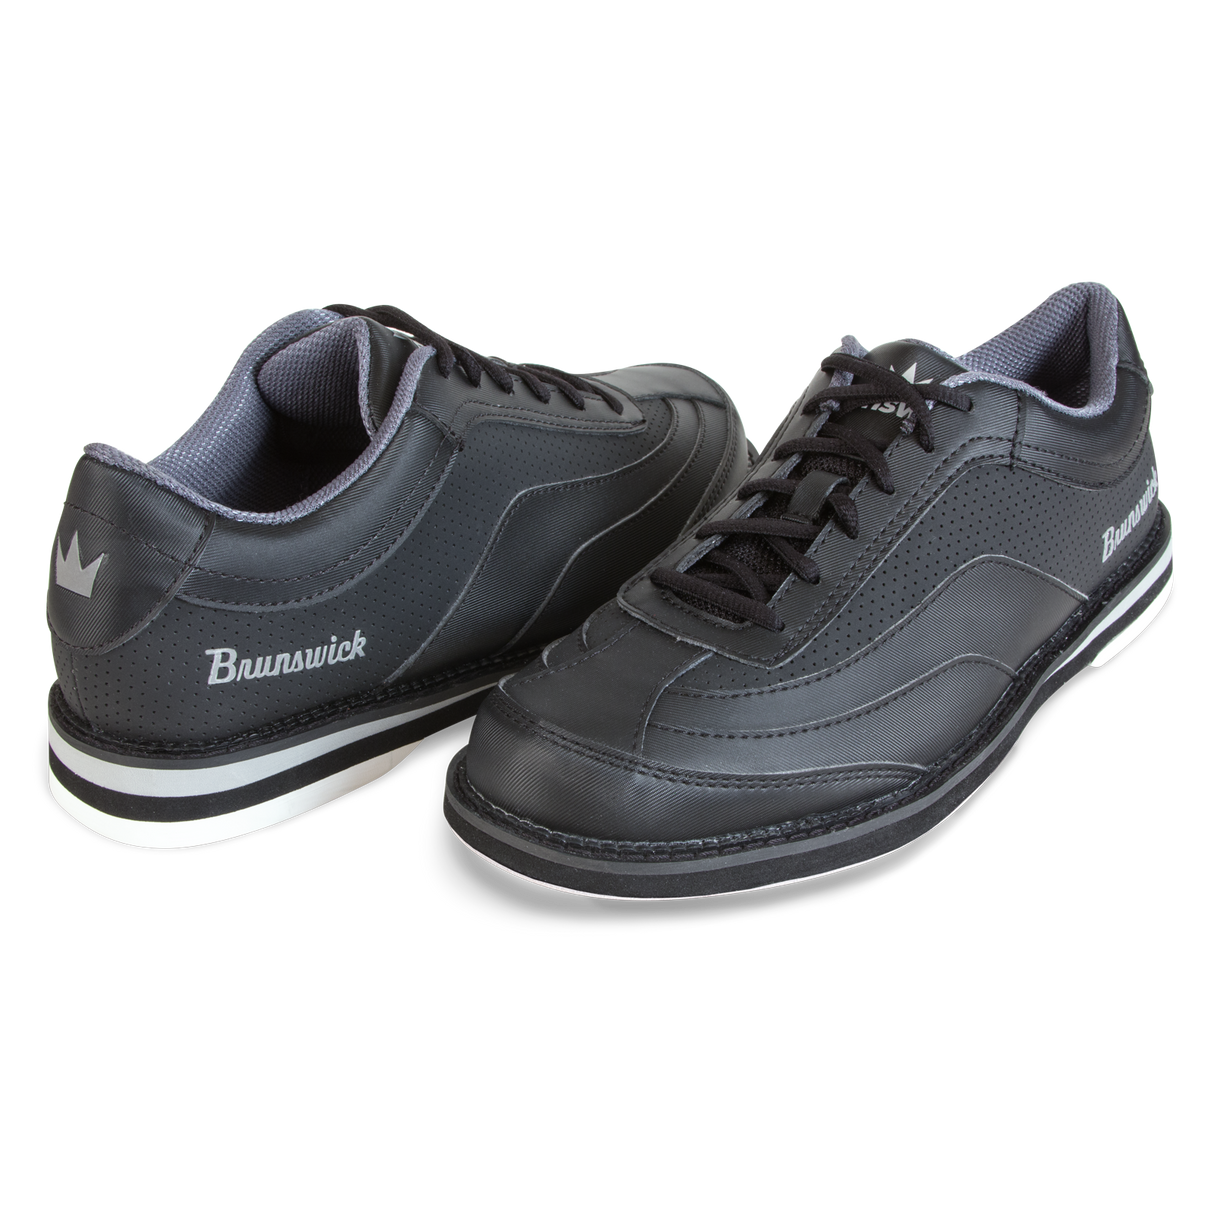 Brunswick Rampage Black Bowling Shoes * Sleek synthetic upper * Molded EVA insole for comfort and performance * Extreme cushion comfort with Ortholite footbed * Convenient ATOP dial lacing system *  * 